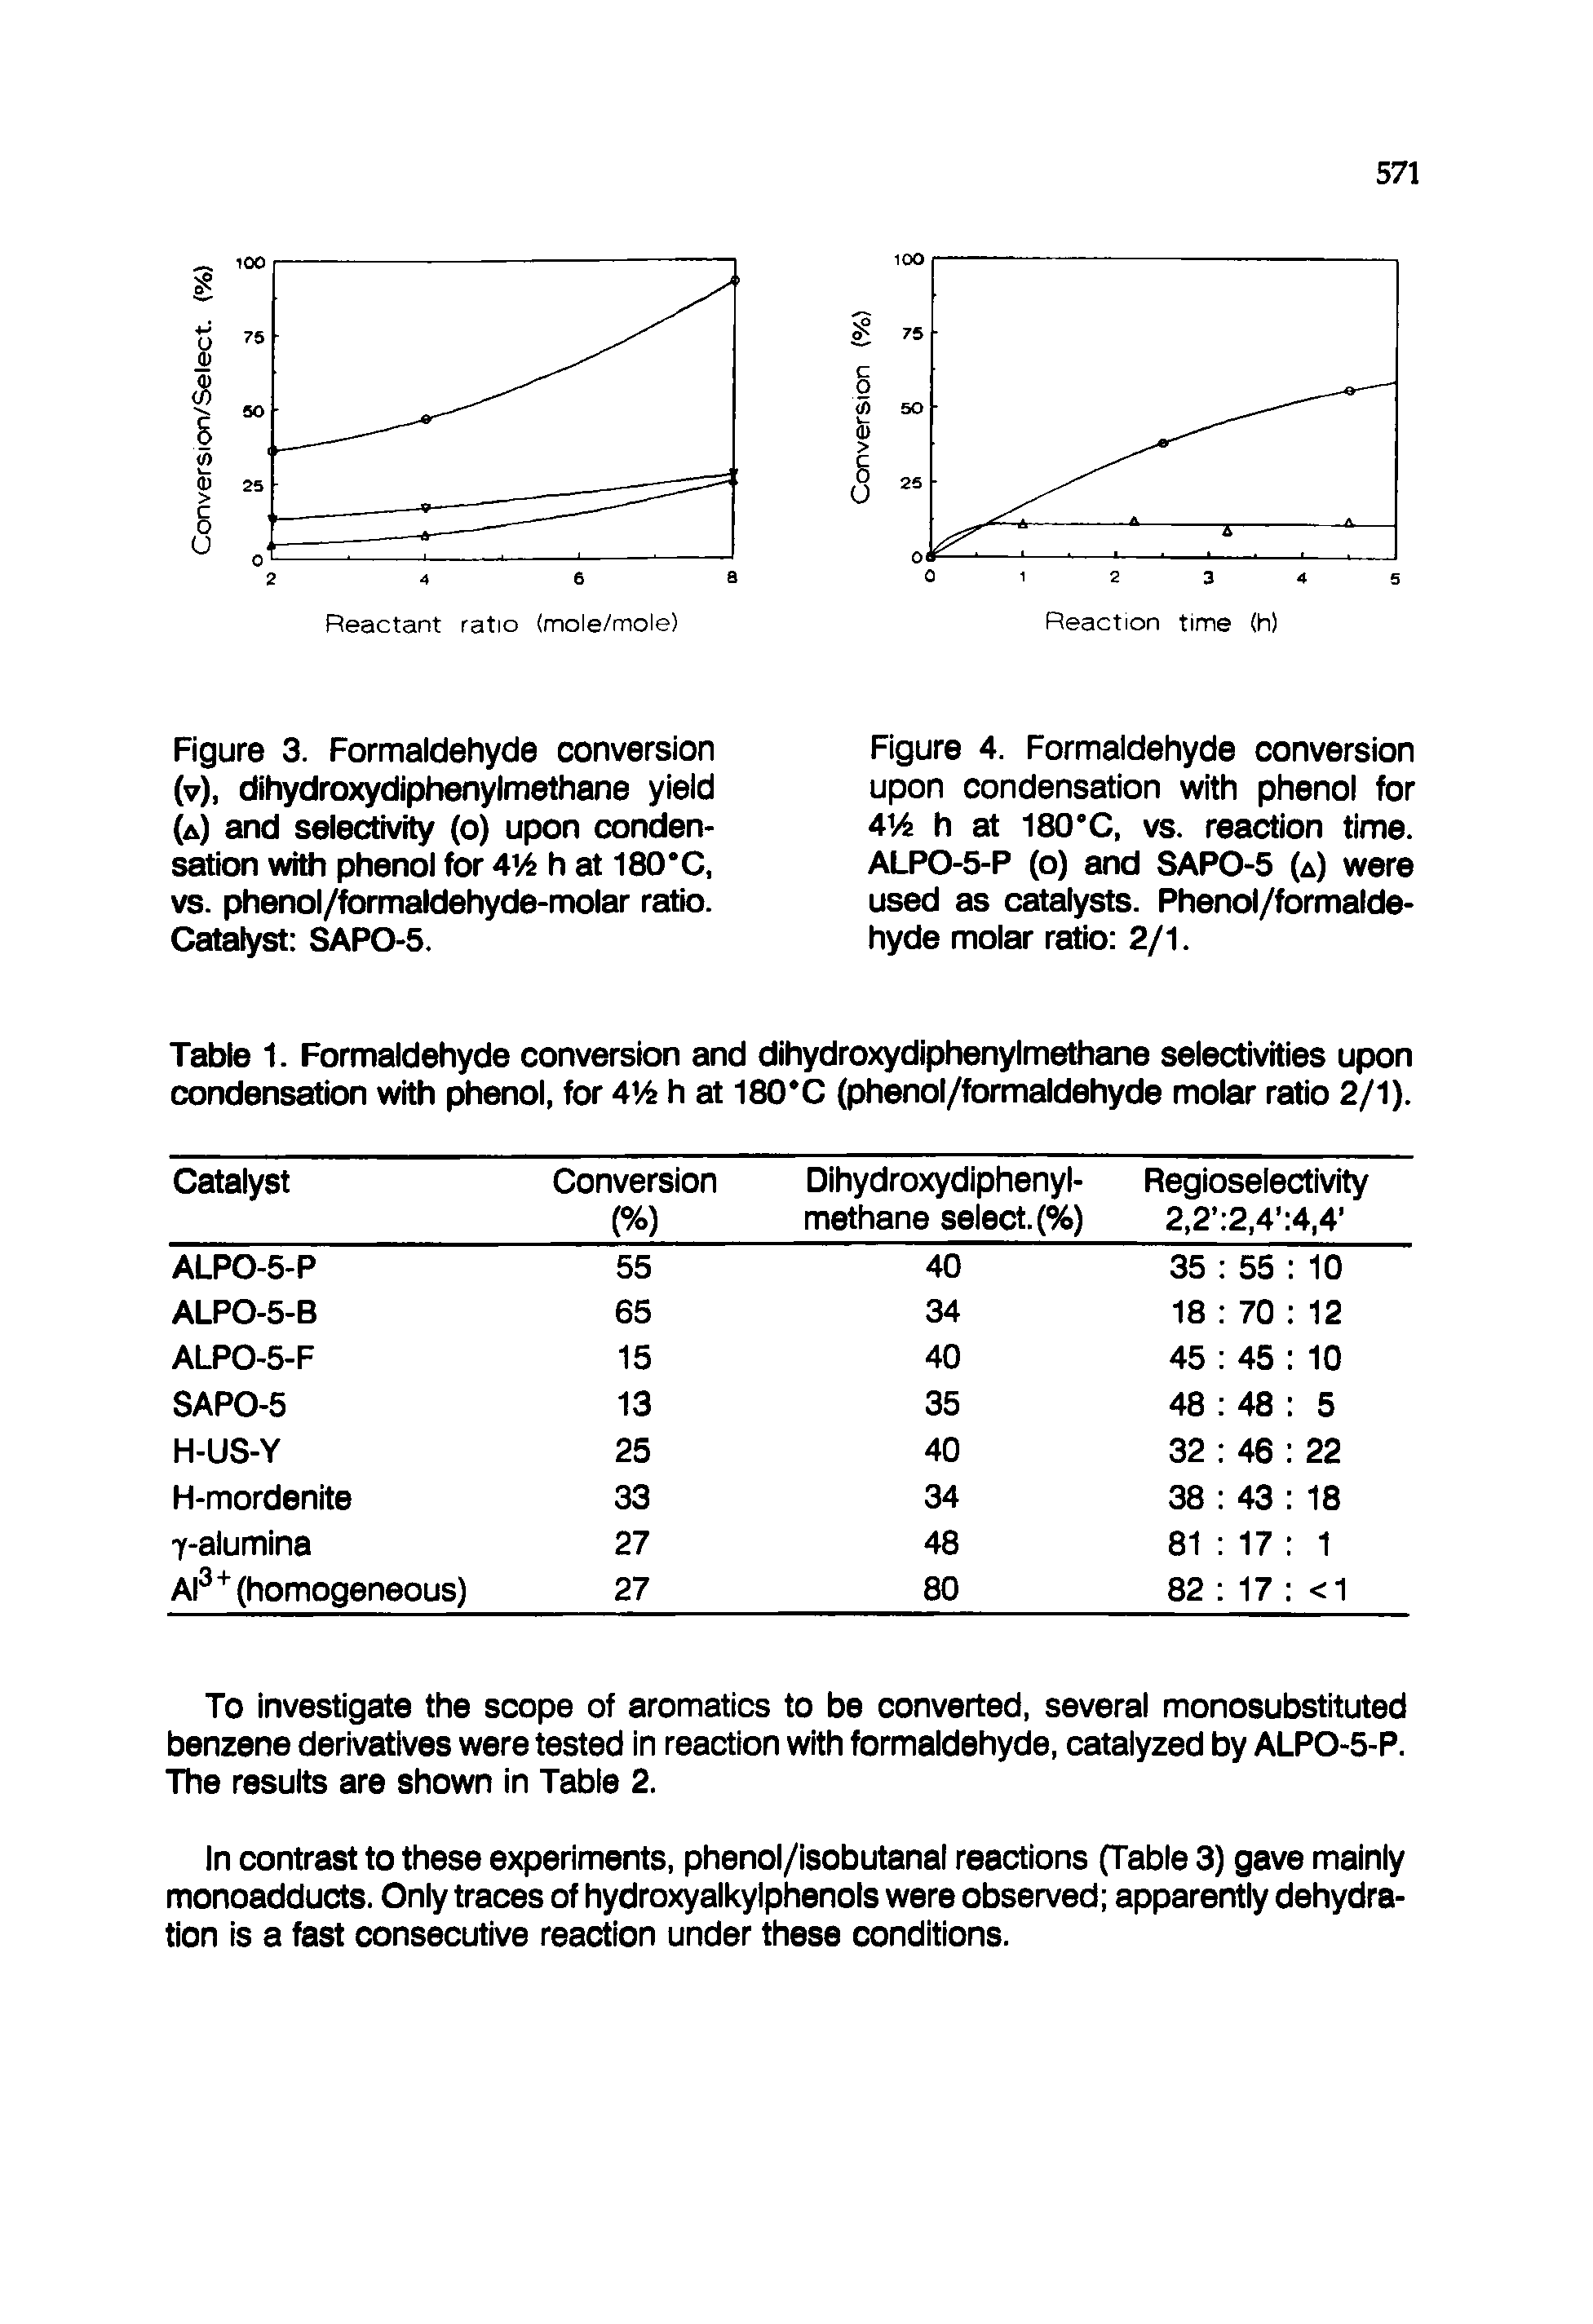 Figure 3. Formaldehyde conversion (7), dihydroxydiphenylmethane yield (a) and selectivity (o) upon condensation with phenol for 4V6 h at 180 C, vs. phenol/formaldehyde-molar ratio. Catalyst SAPO-5.